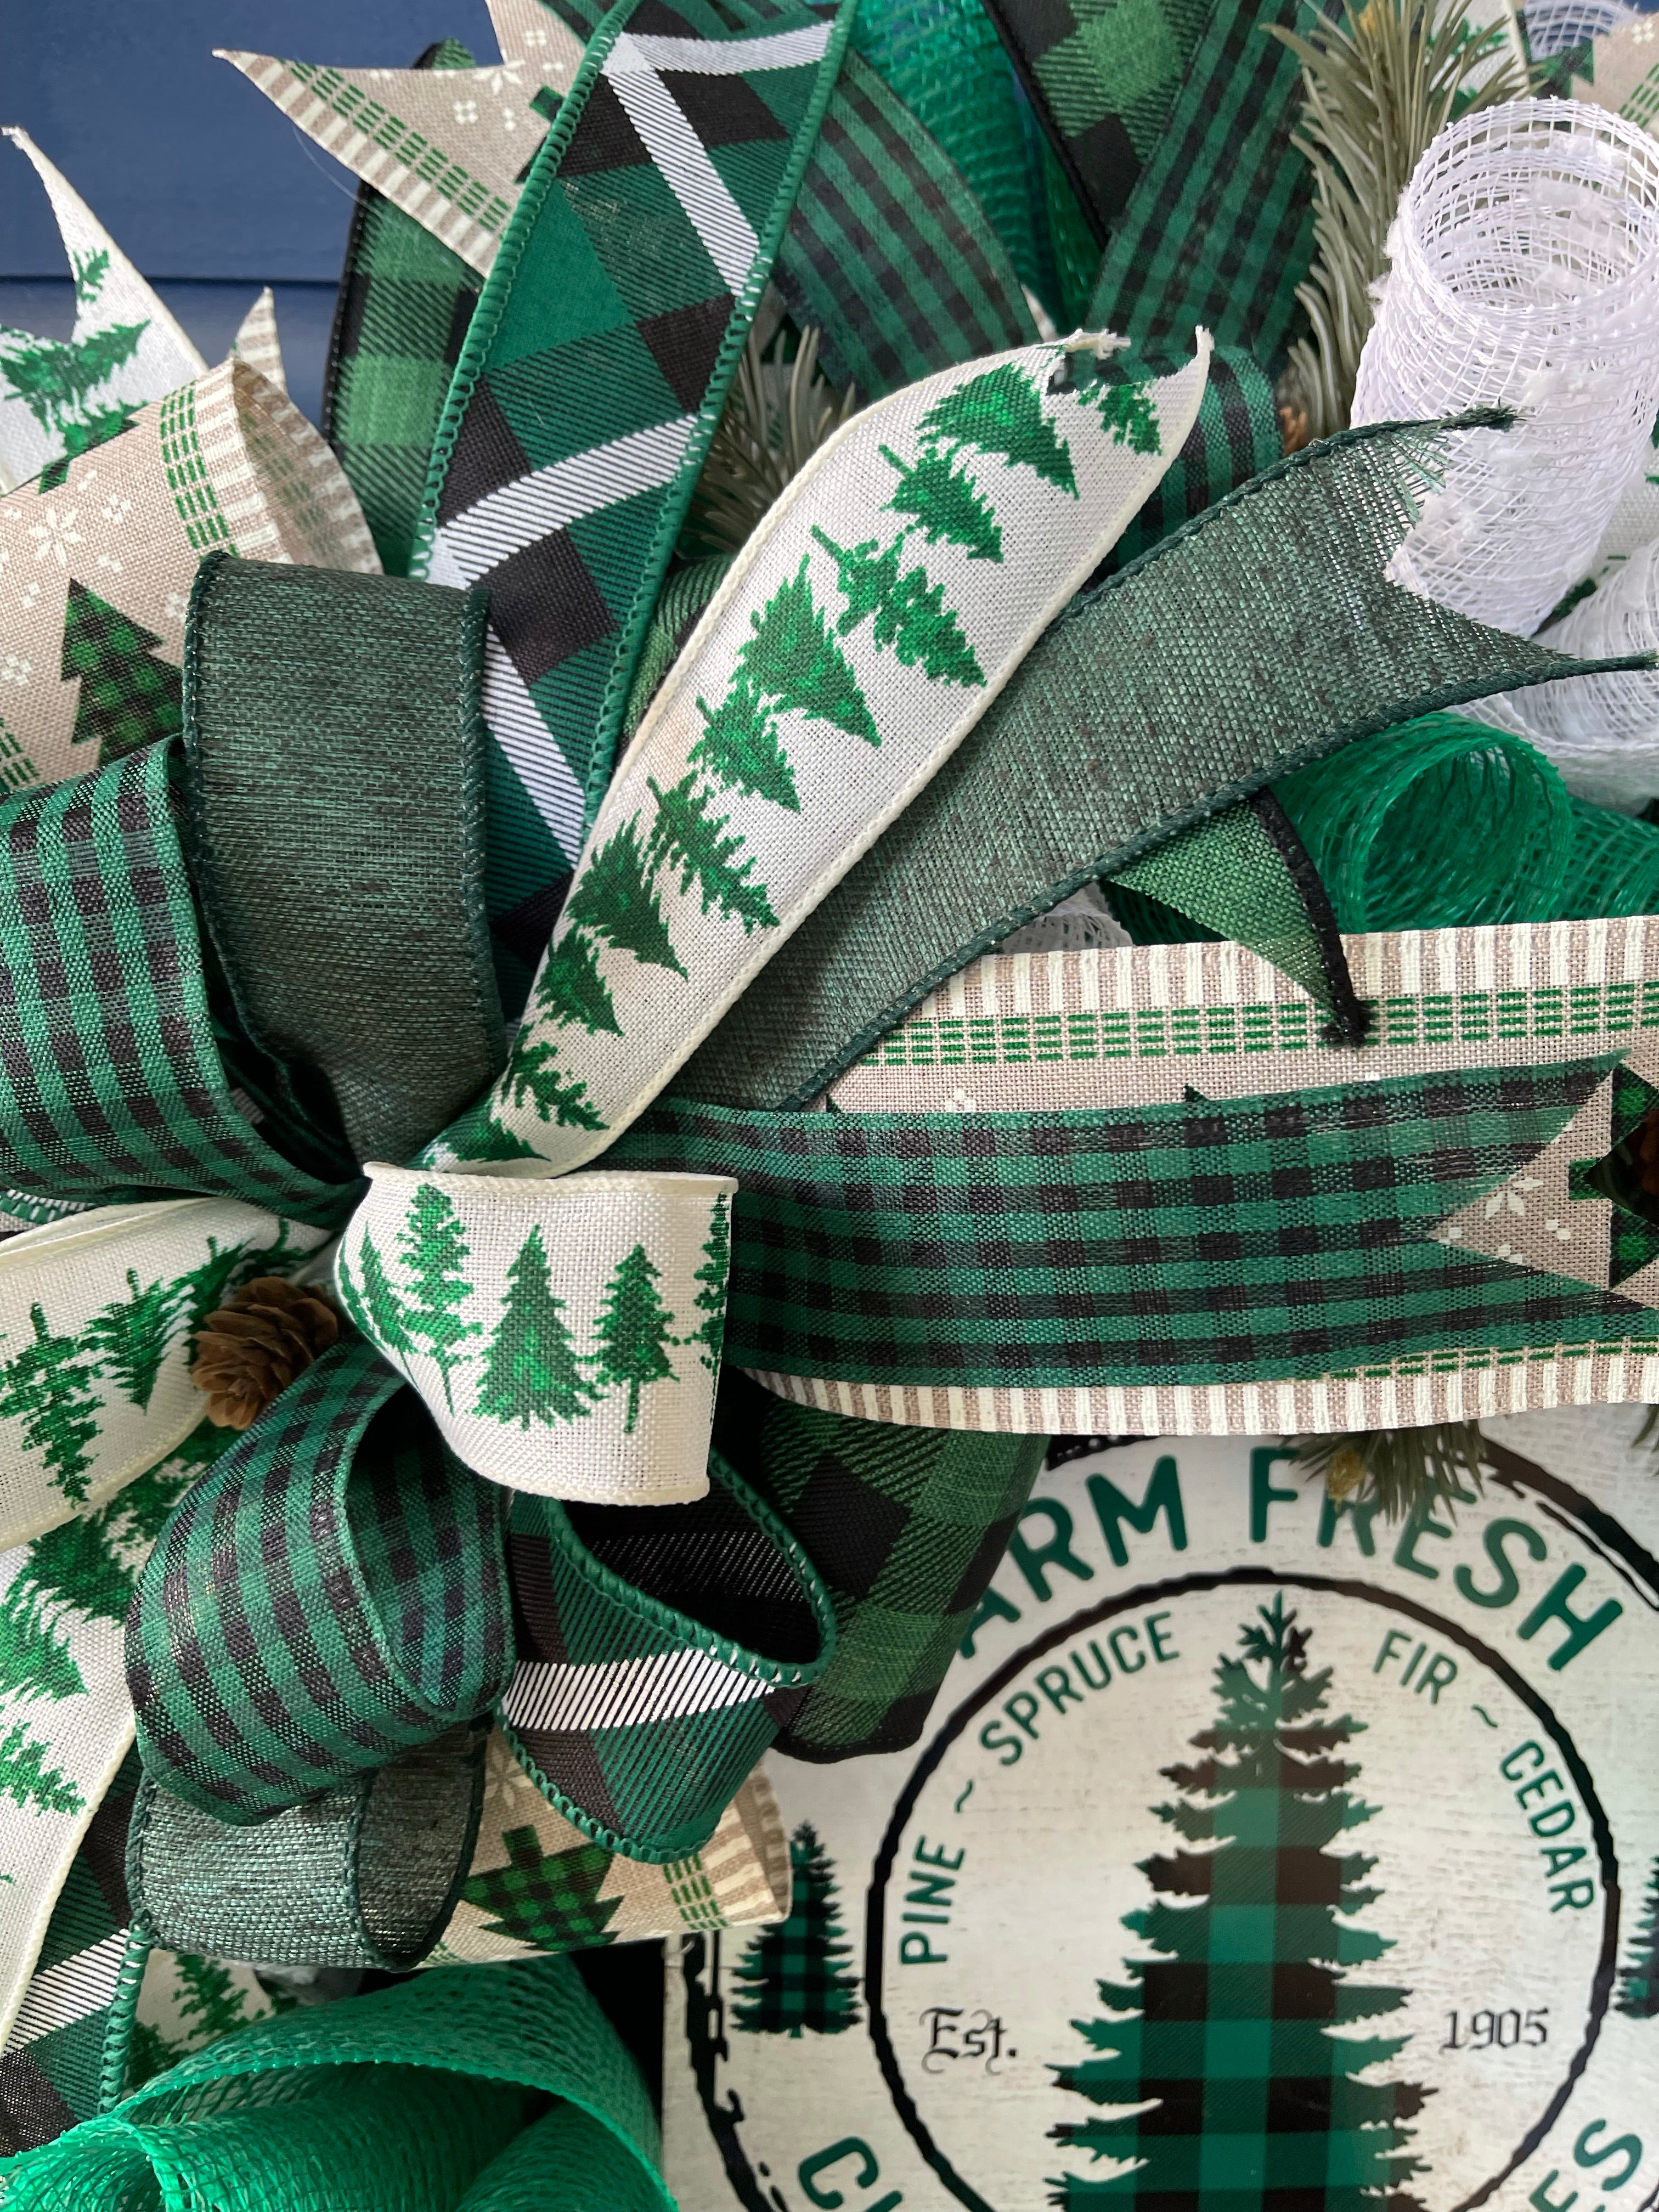 Close Up of Ribbons in the Bow featuring pine trees on white, along with various prints of black, white and Green plaid and gingham ribbons